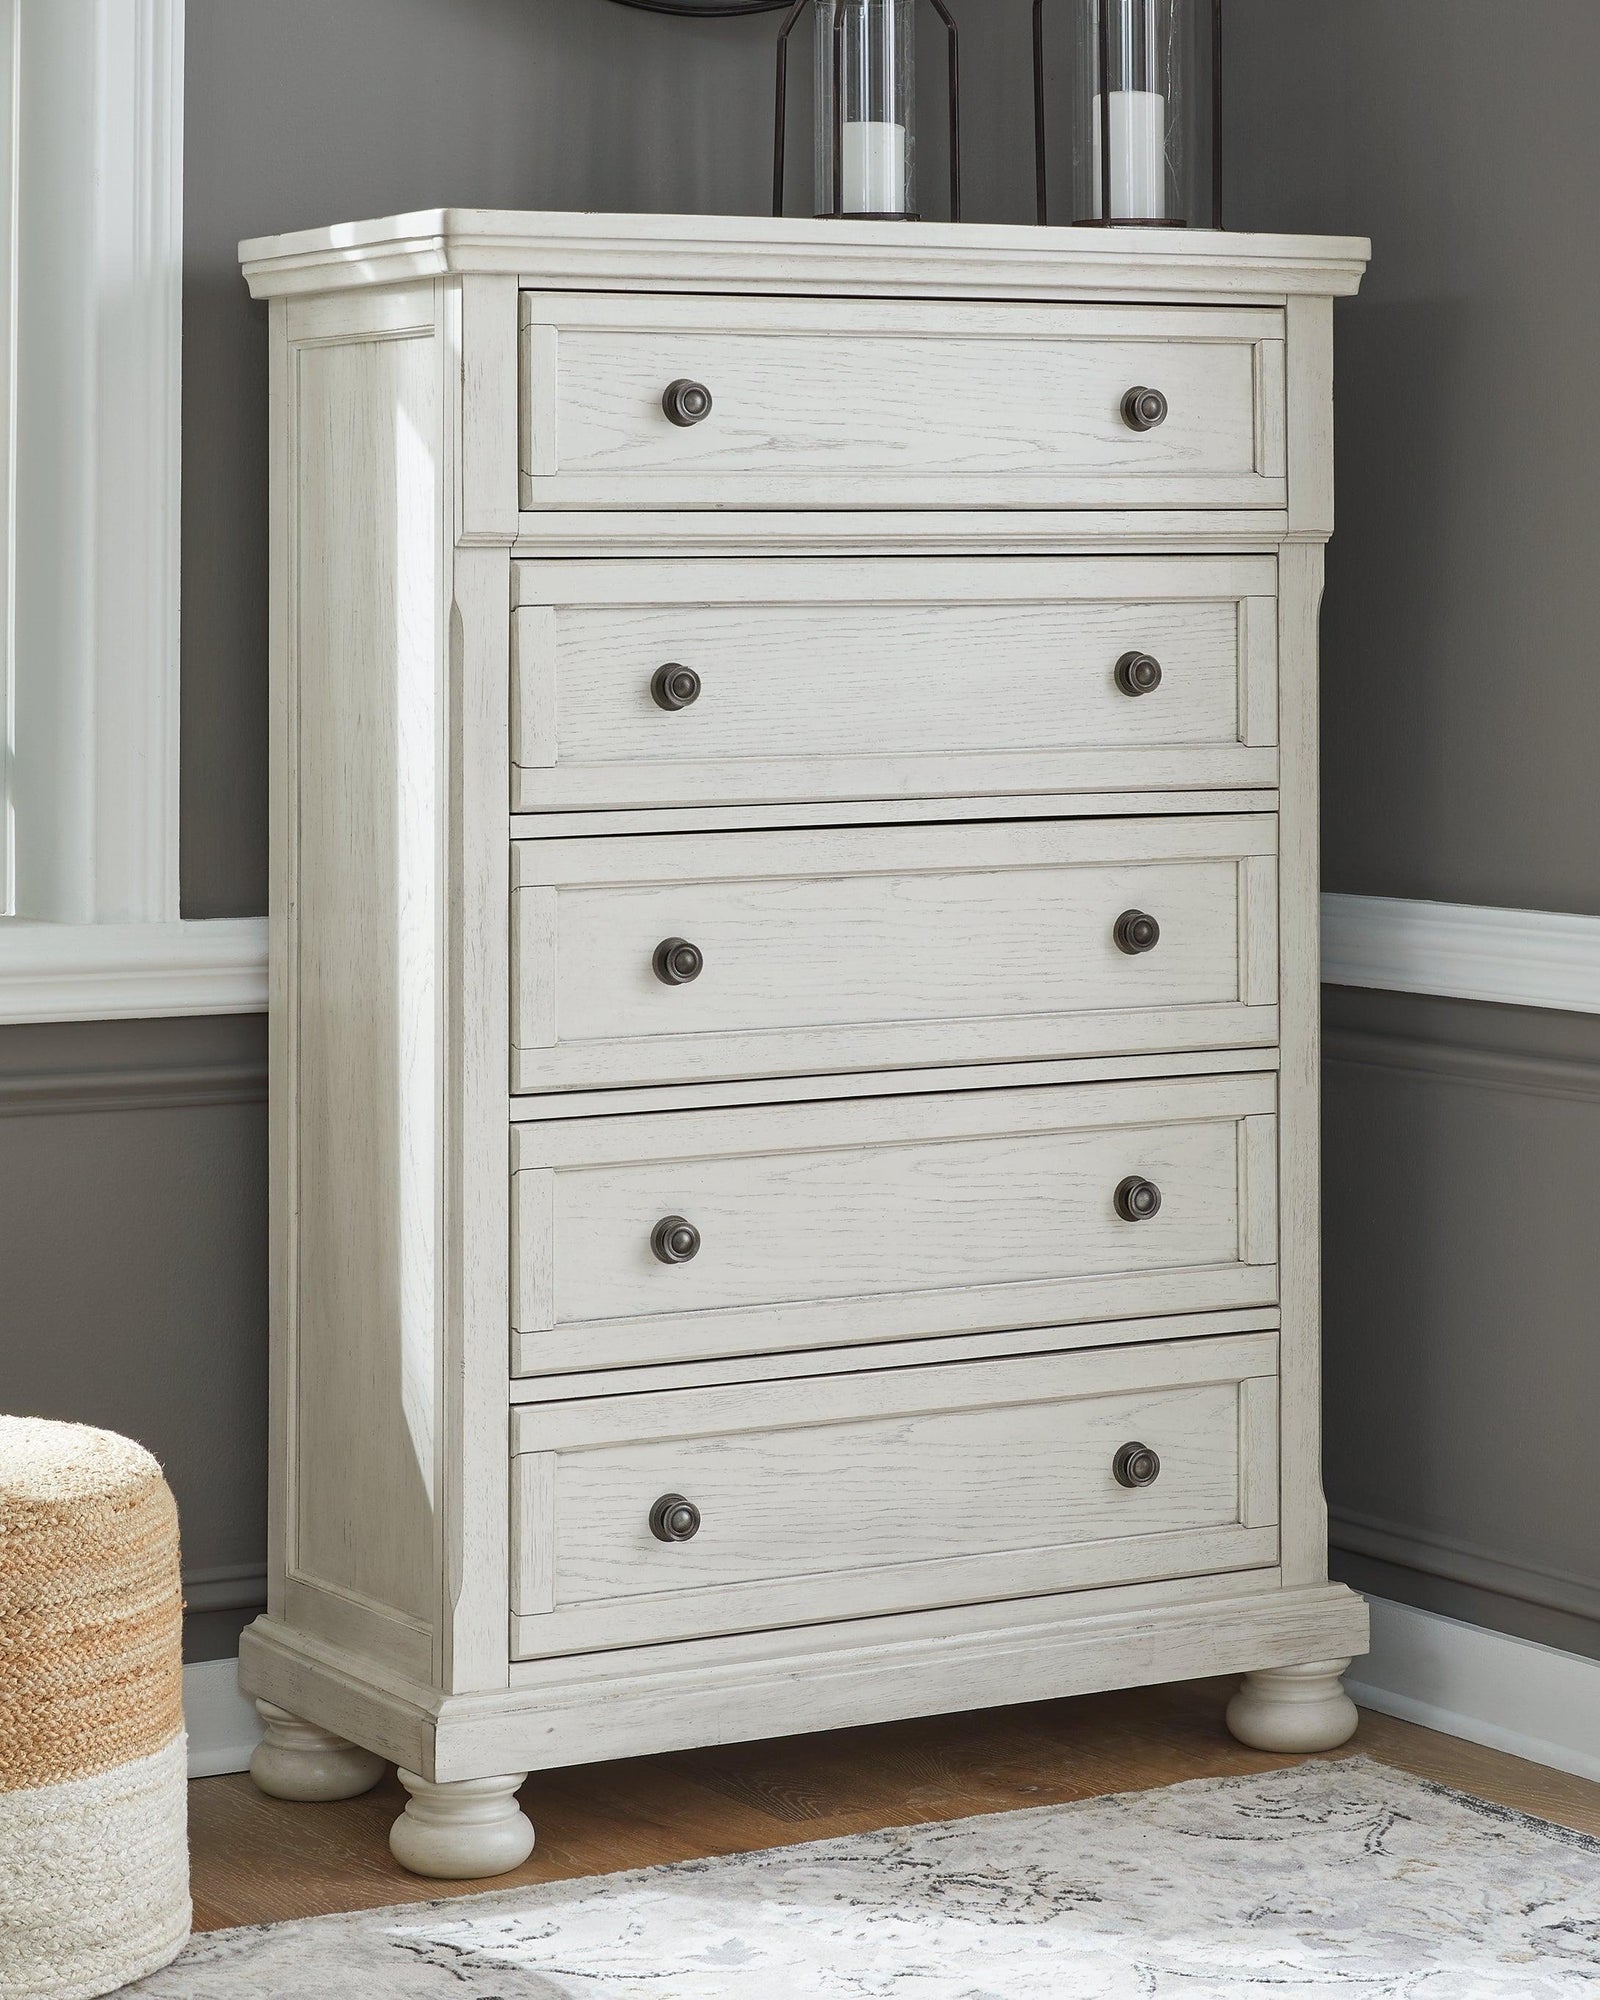 Robbinsdale Antique White Chest Of Drawers - Ella Furniture